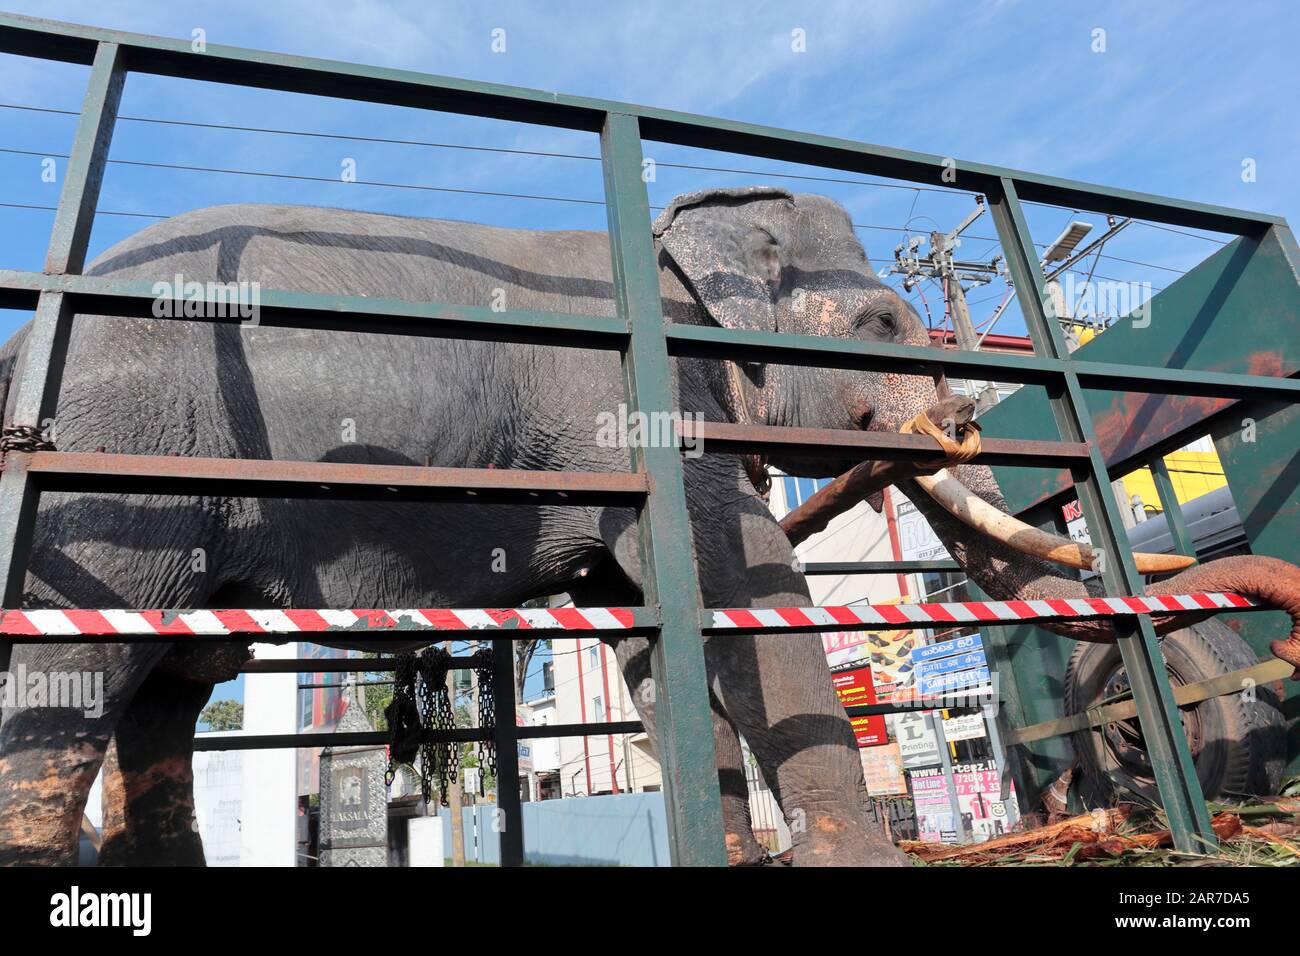 An Indian elephant being transported through Colombo, Sri Lanka in an open backed lorry. Possibly to a local festival or event. Stock Photo